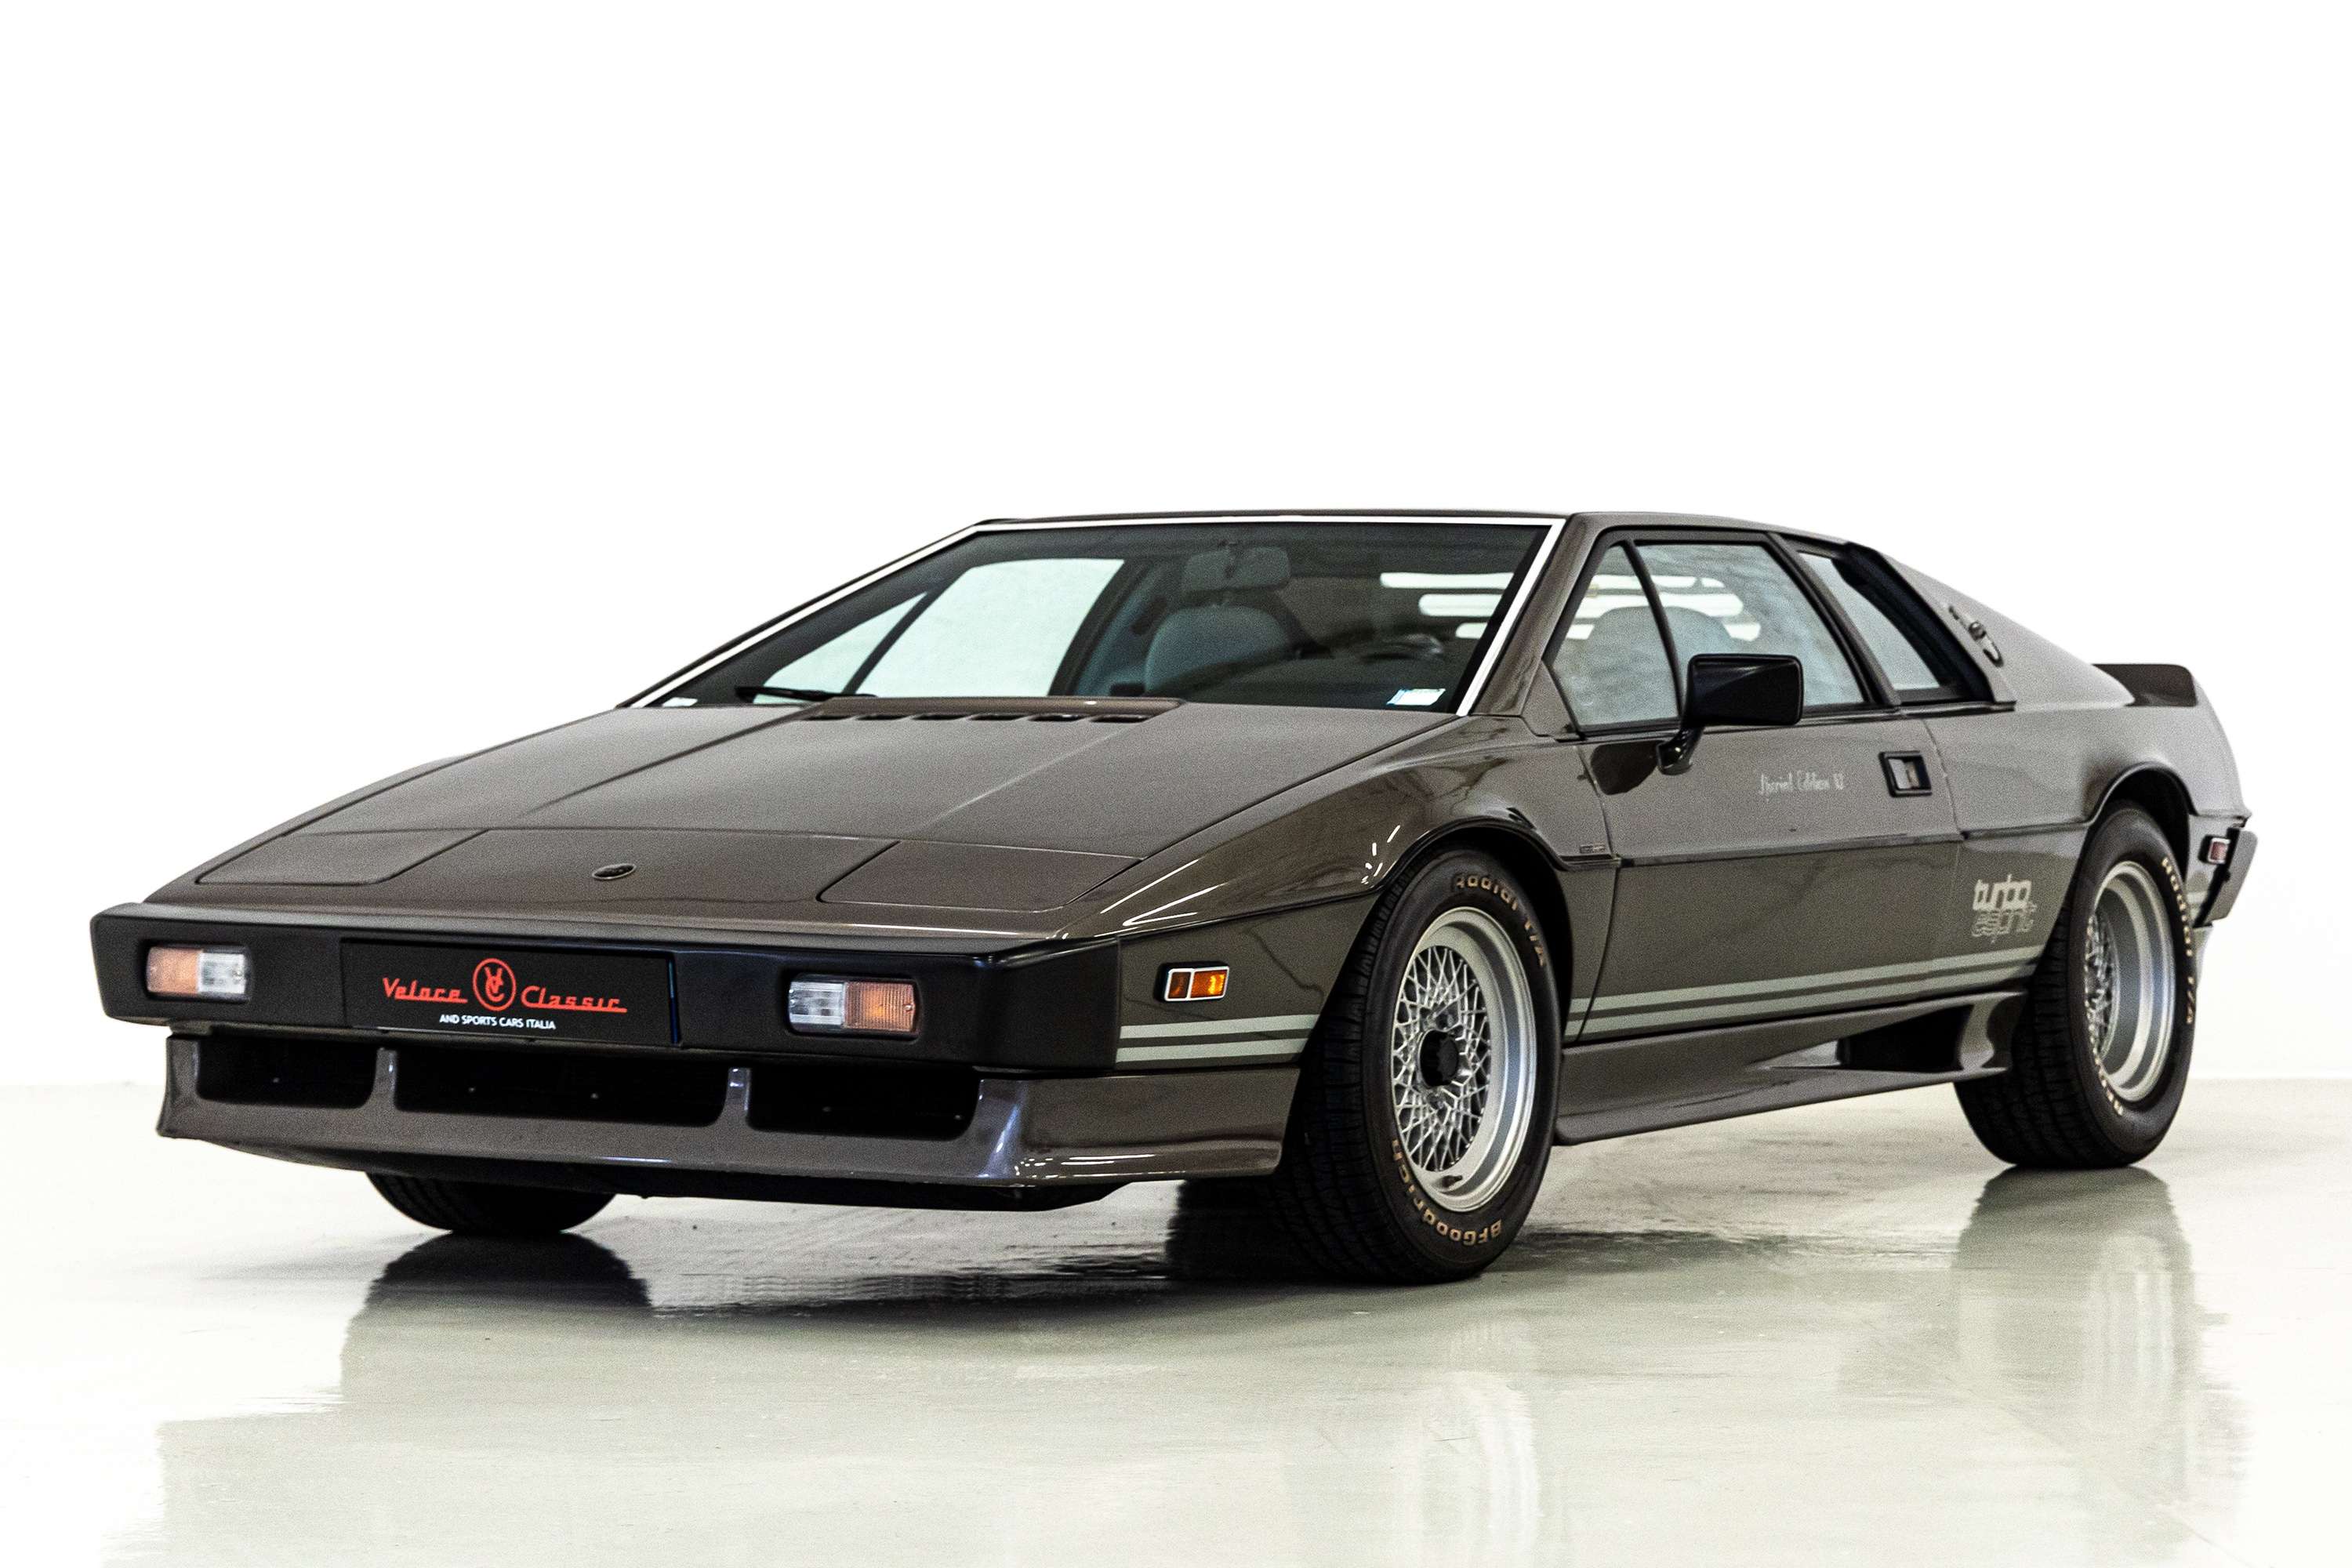 Lotus Esprit Coupe in Silver used in Veggiano - Padova - PD for € 95,000.-